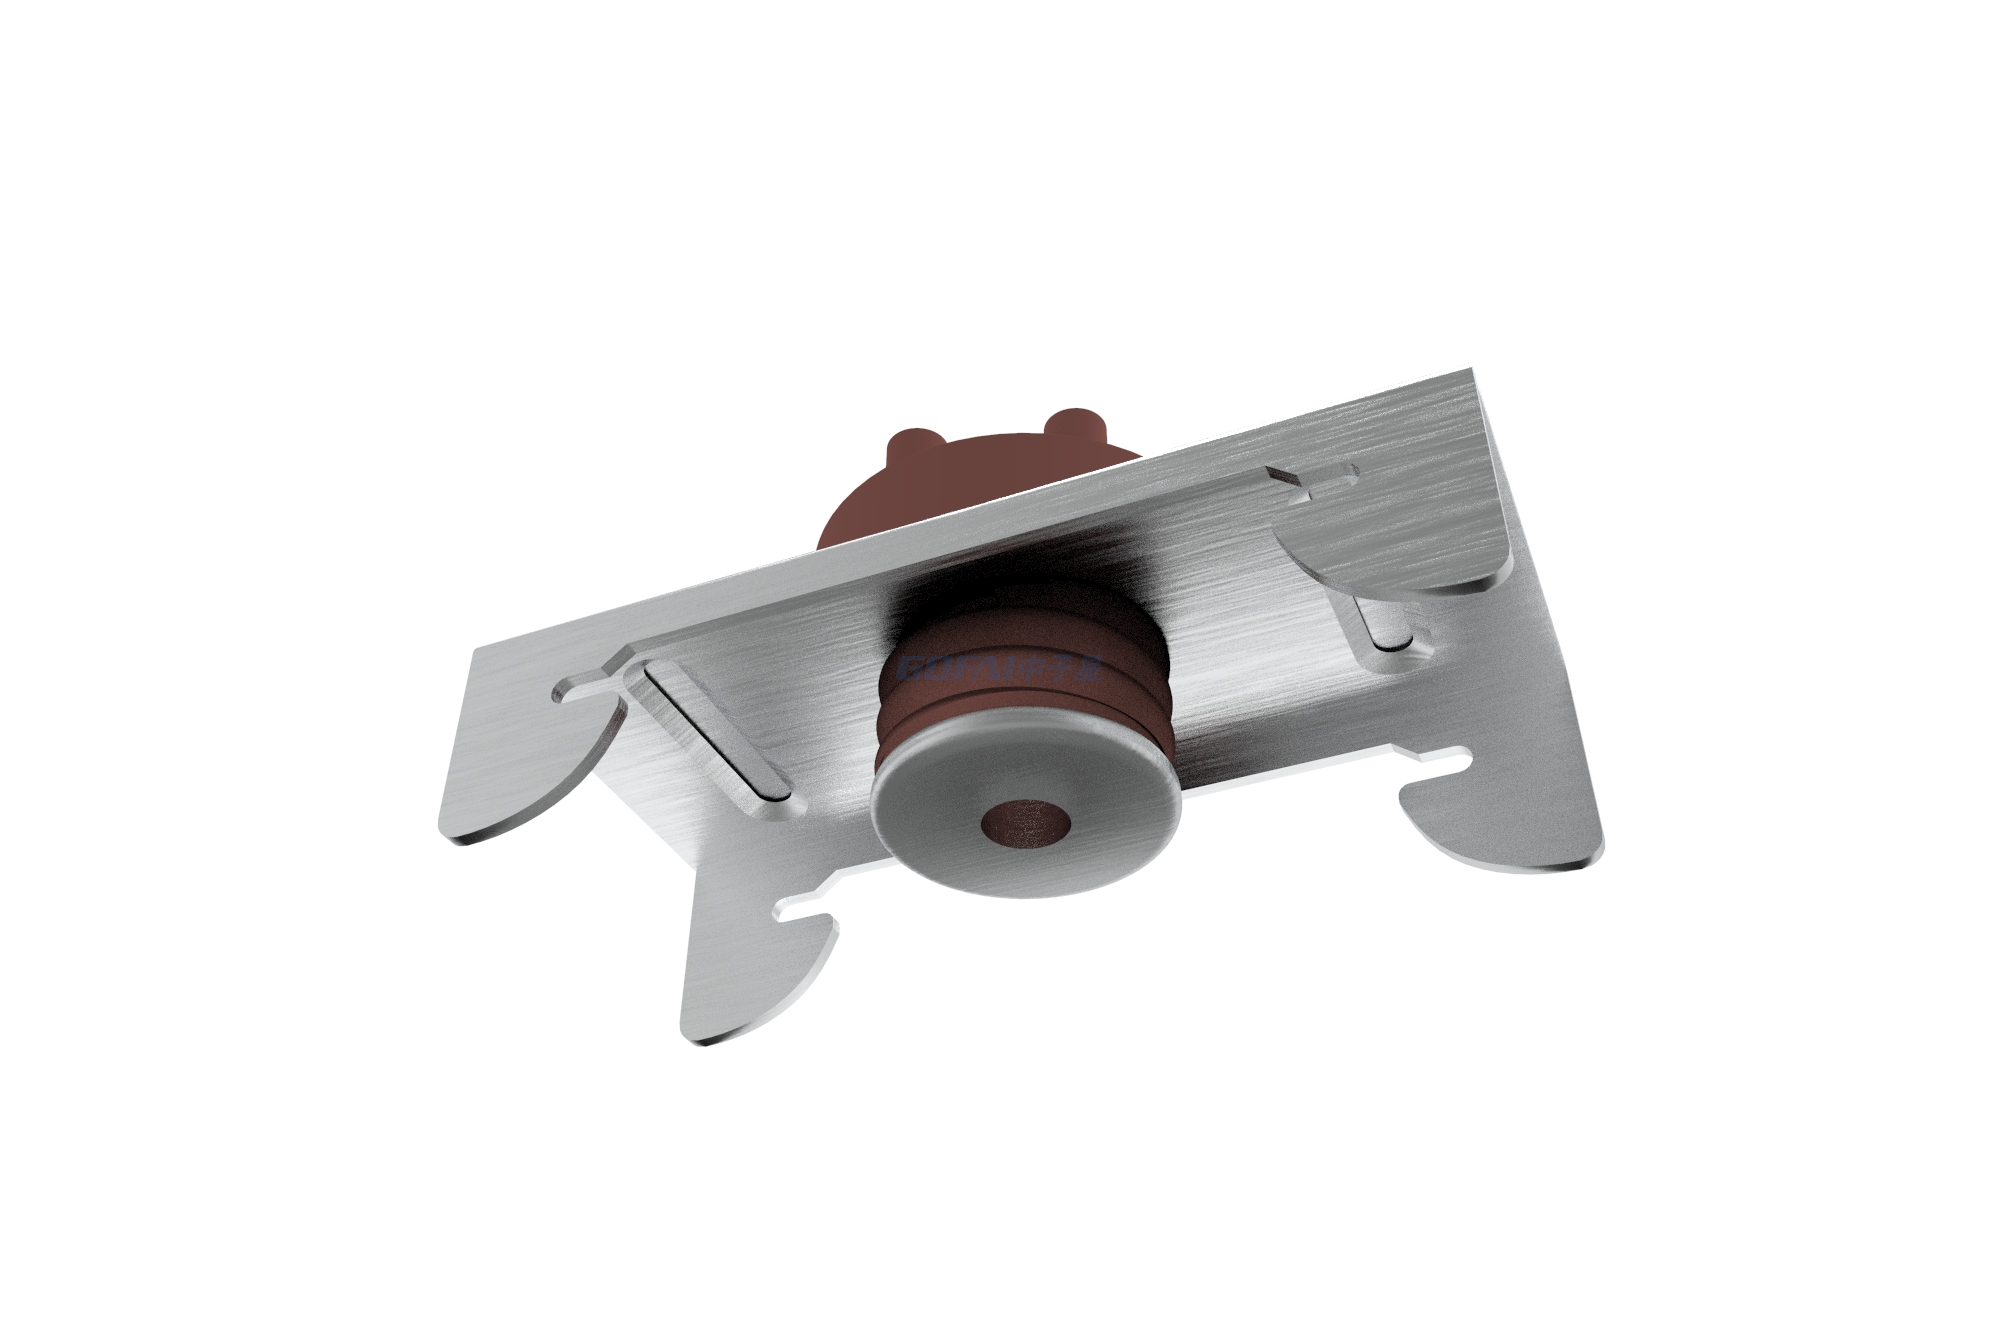 Walls And Ceilings Shock Absorber Sound Proofing Resilisent Sound Isolation Clips Acoustic Clips